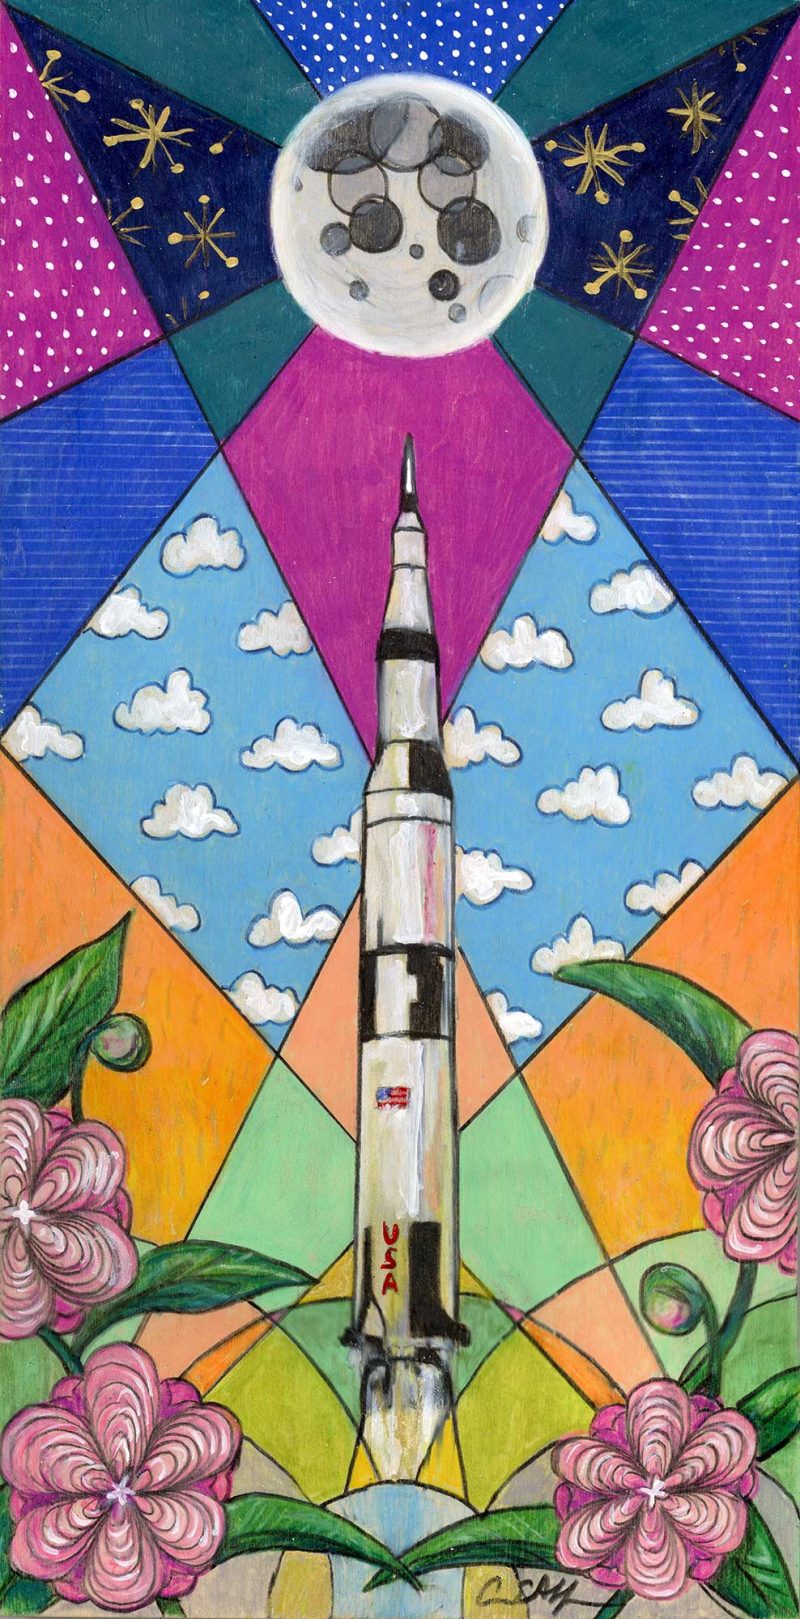 SOLD - "Saturn V and Camellias", 6" x 12", mixed media